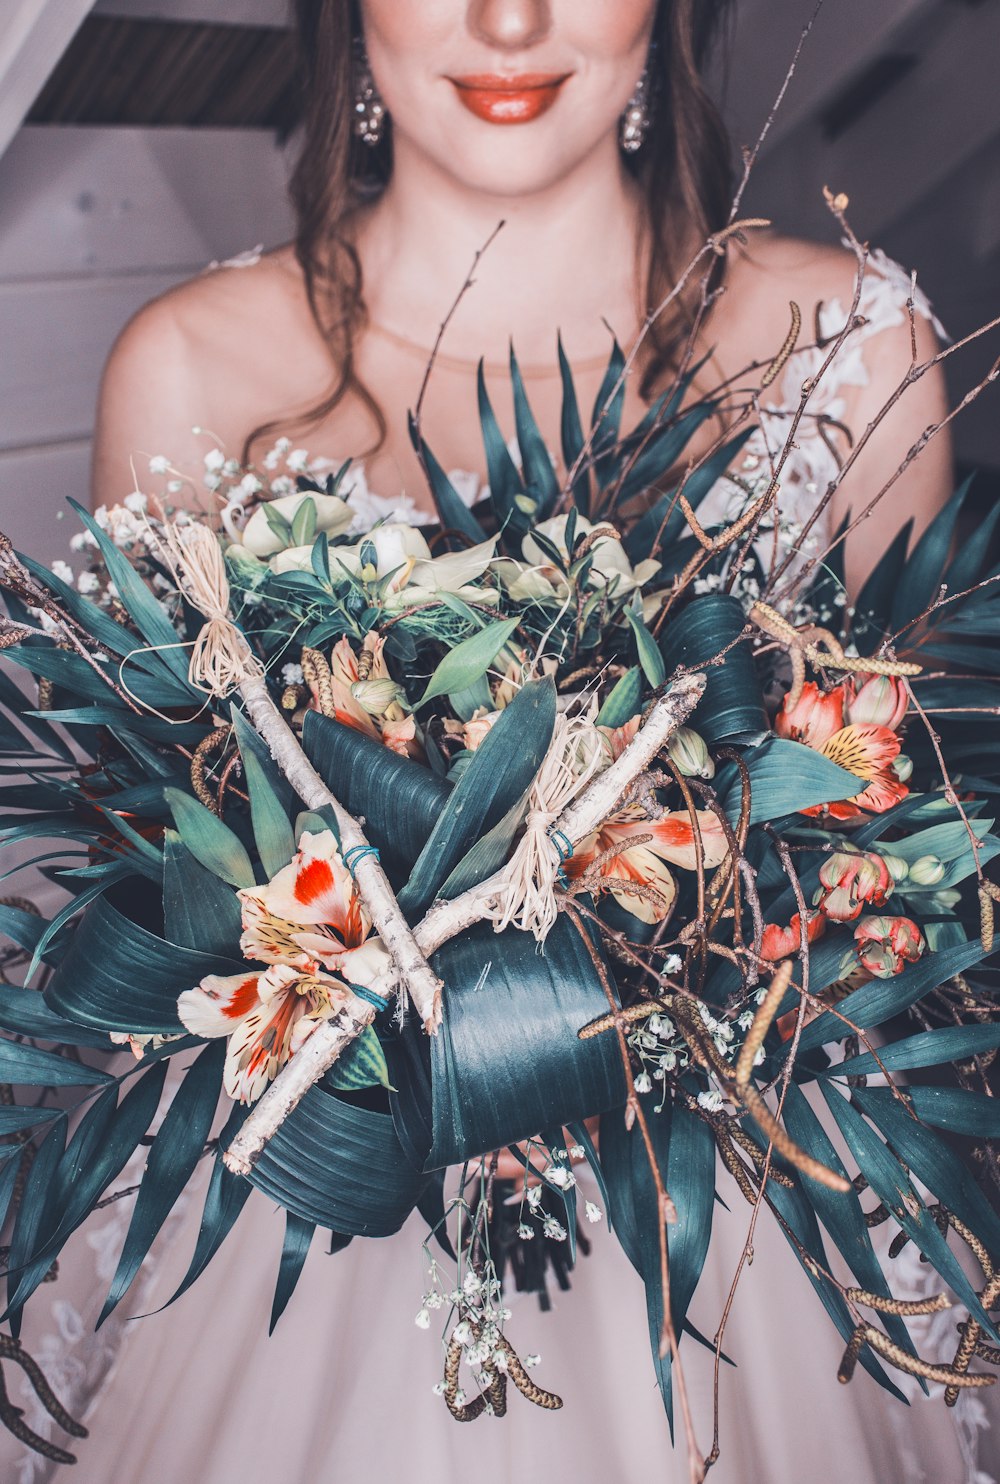 selective focus photography of woman holding flower bouquet